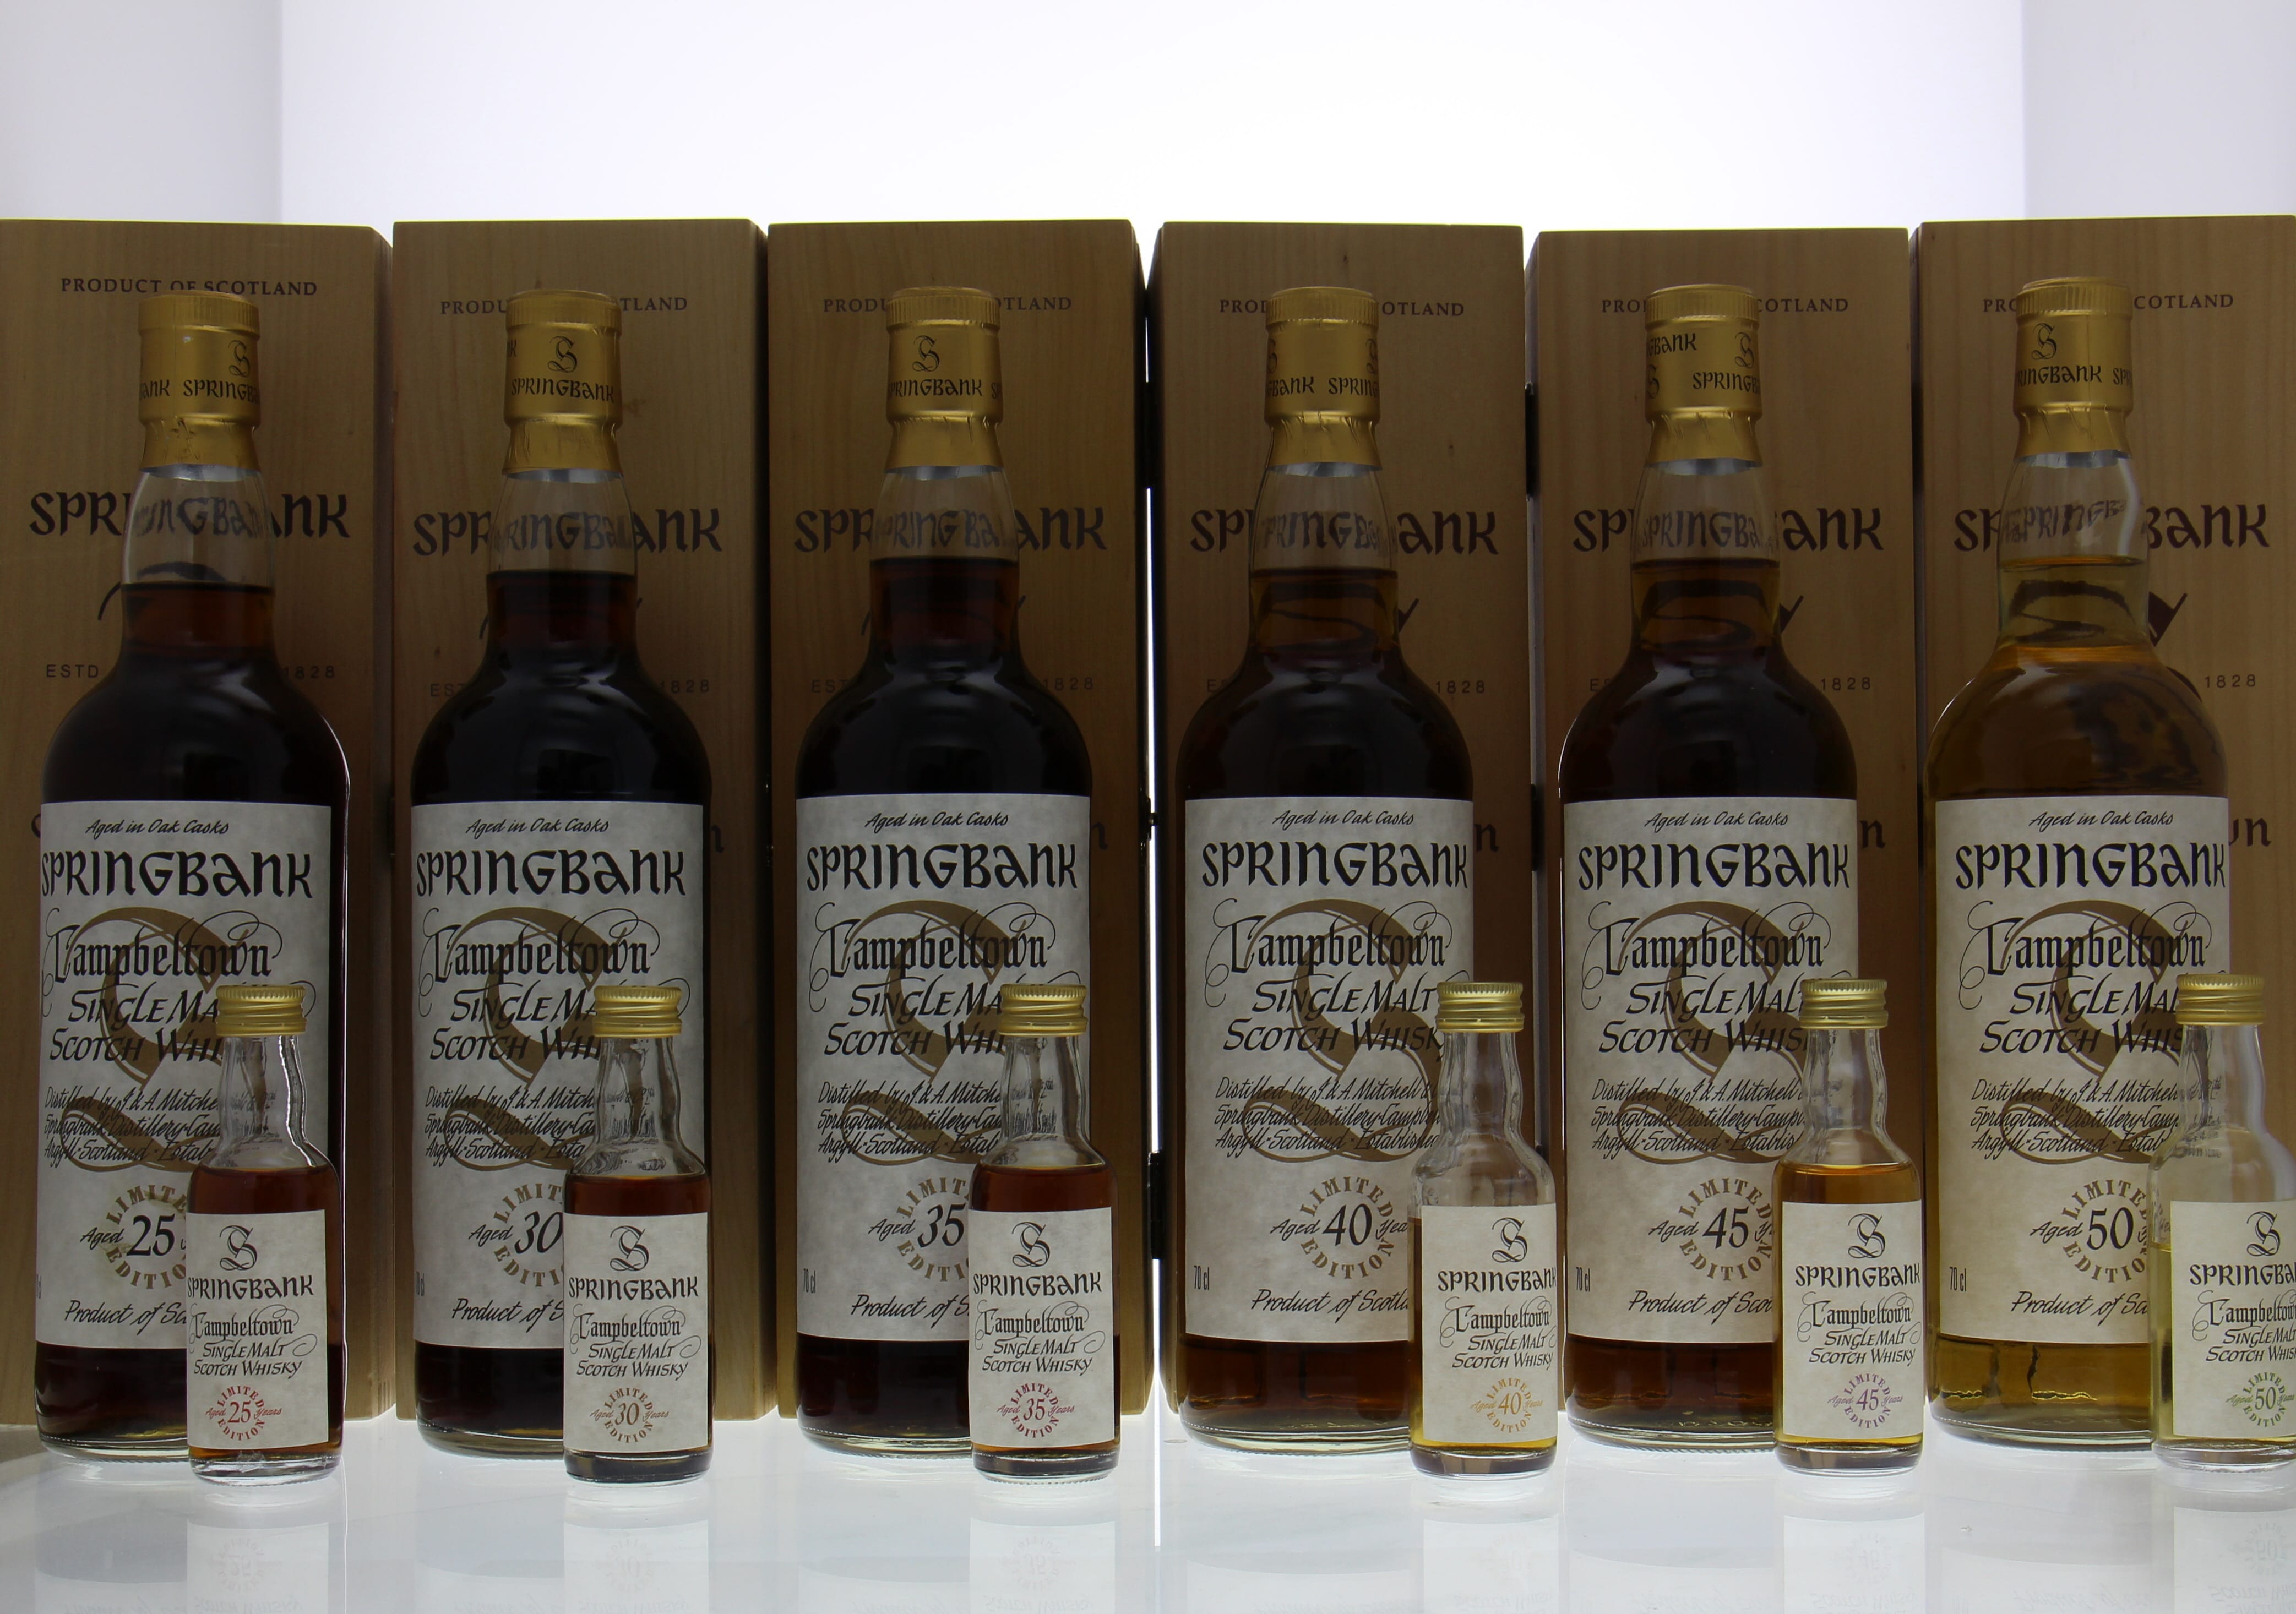 Springbank - Millenium Limited Edtion Full Set 25-30-35-40-45-50 Years Old With The Millenium Mini Set 46% selected In Original Wooden Case